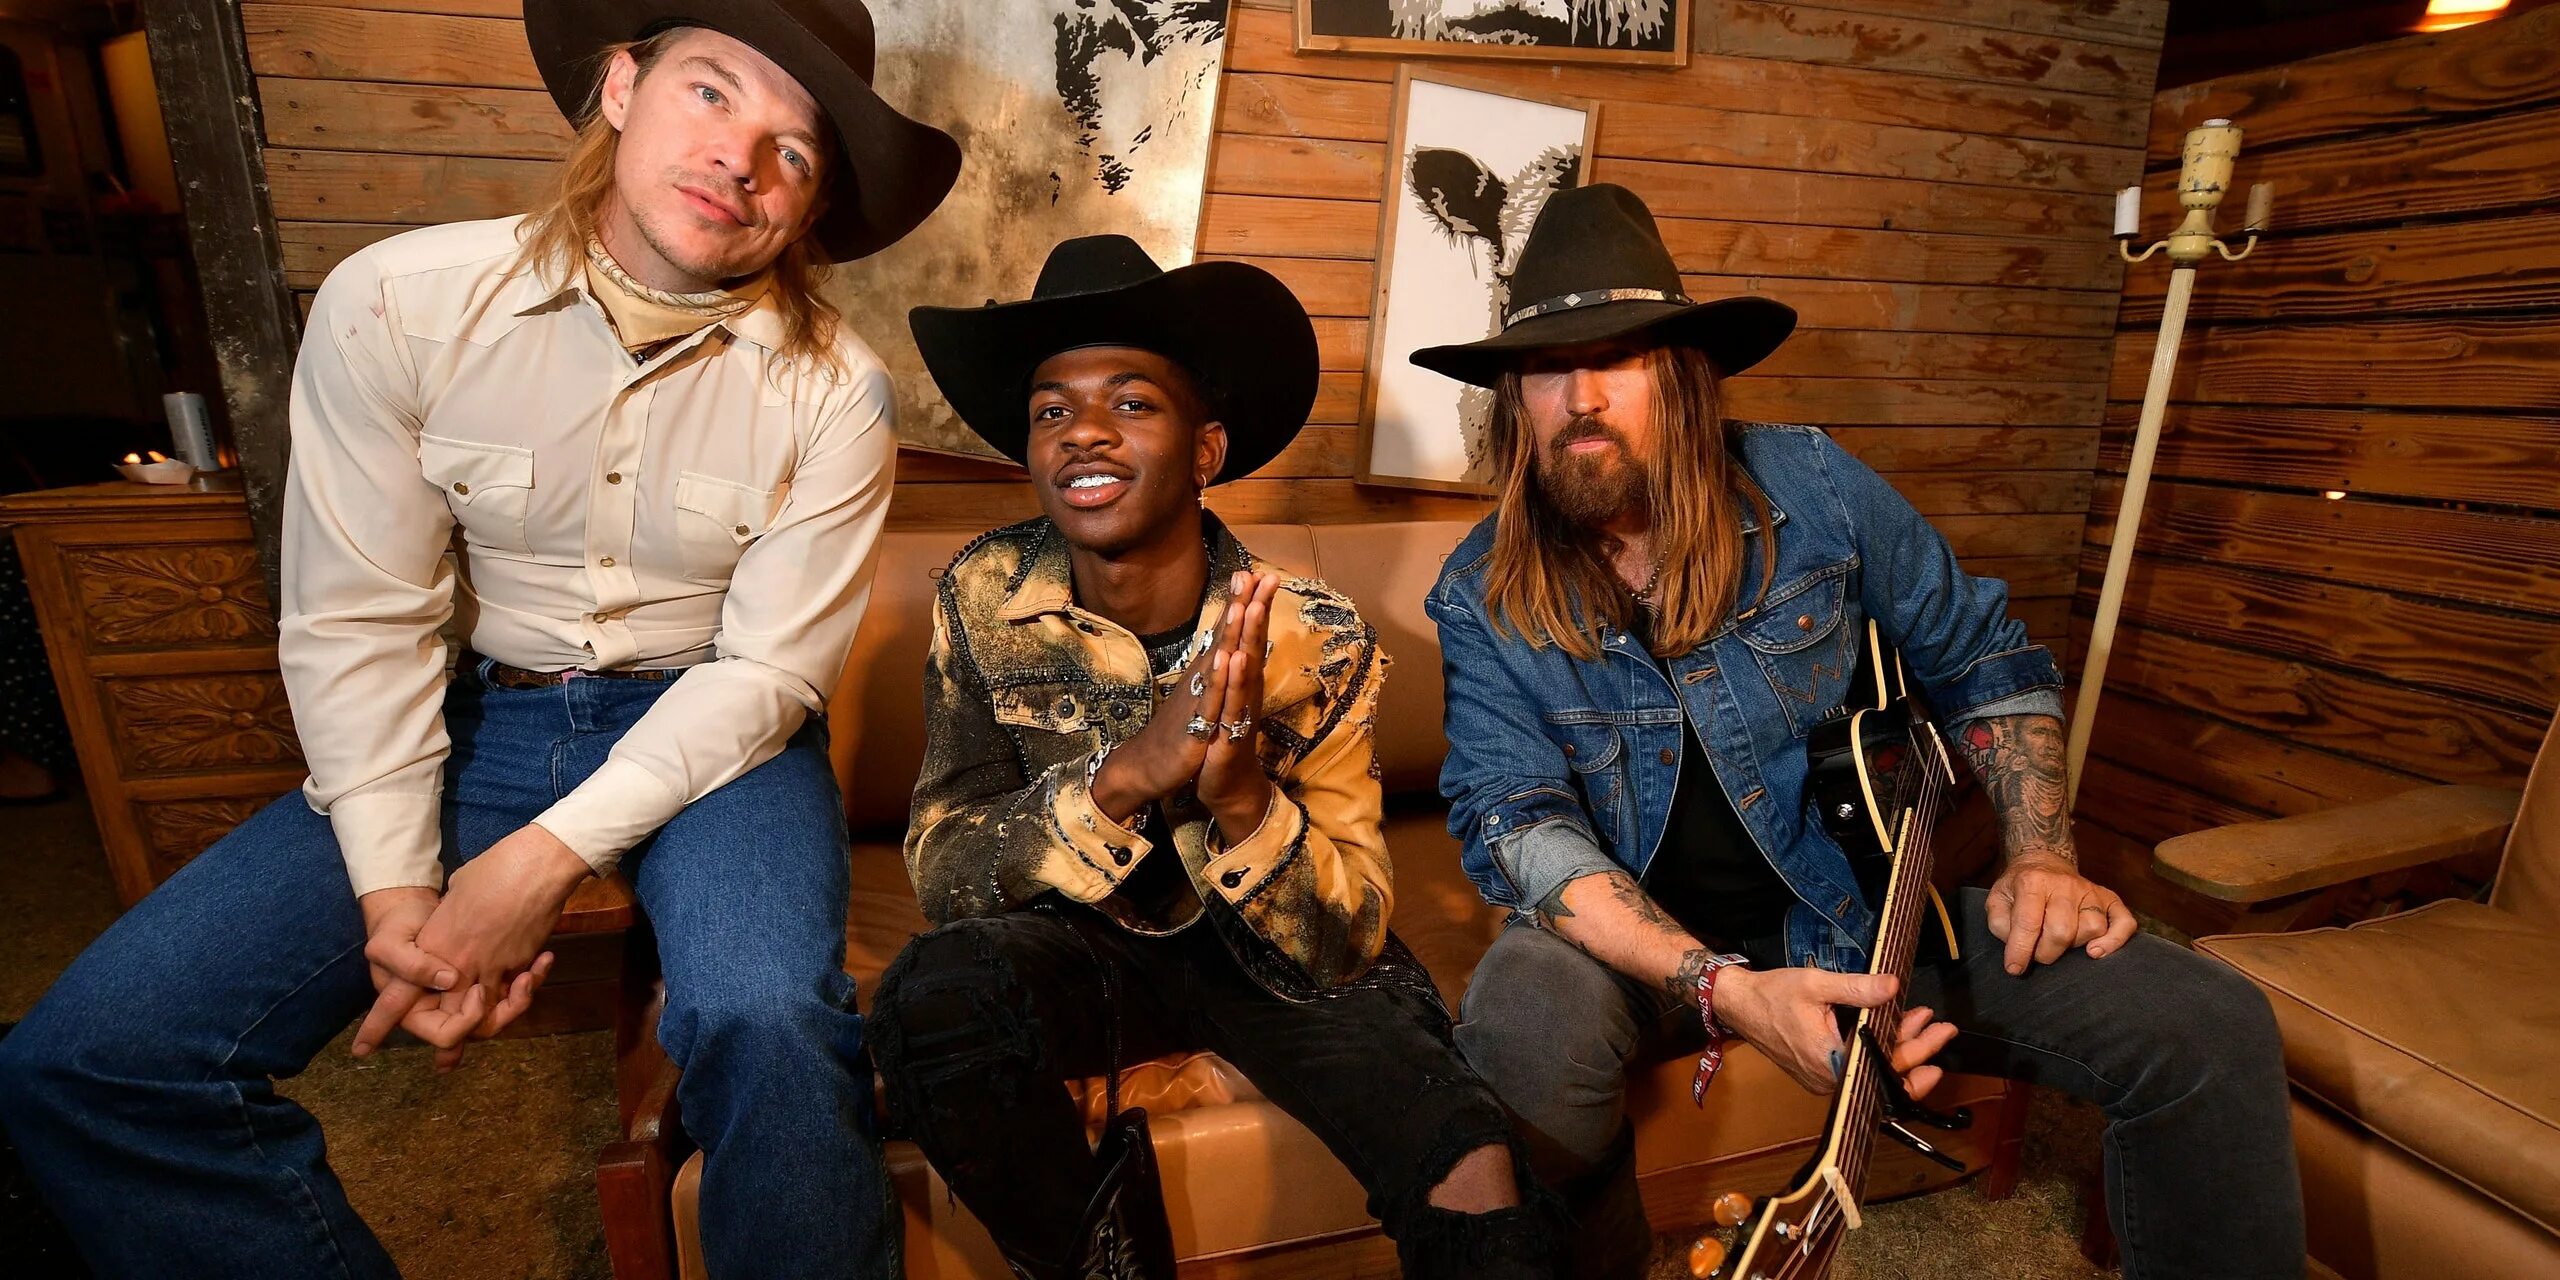 Billy cyrus old town. Old Town Road Брэд Питт. Lil nas x Billy ray Cyrus old Town Road. Lil nas x ft. Billy ray Cyrus.